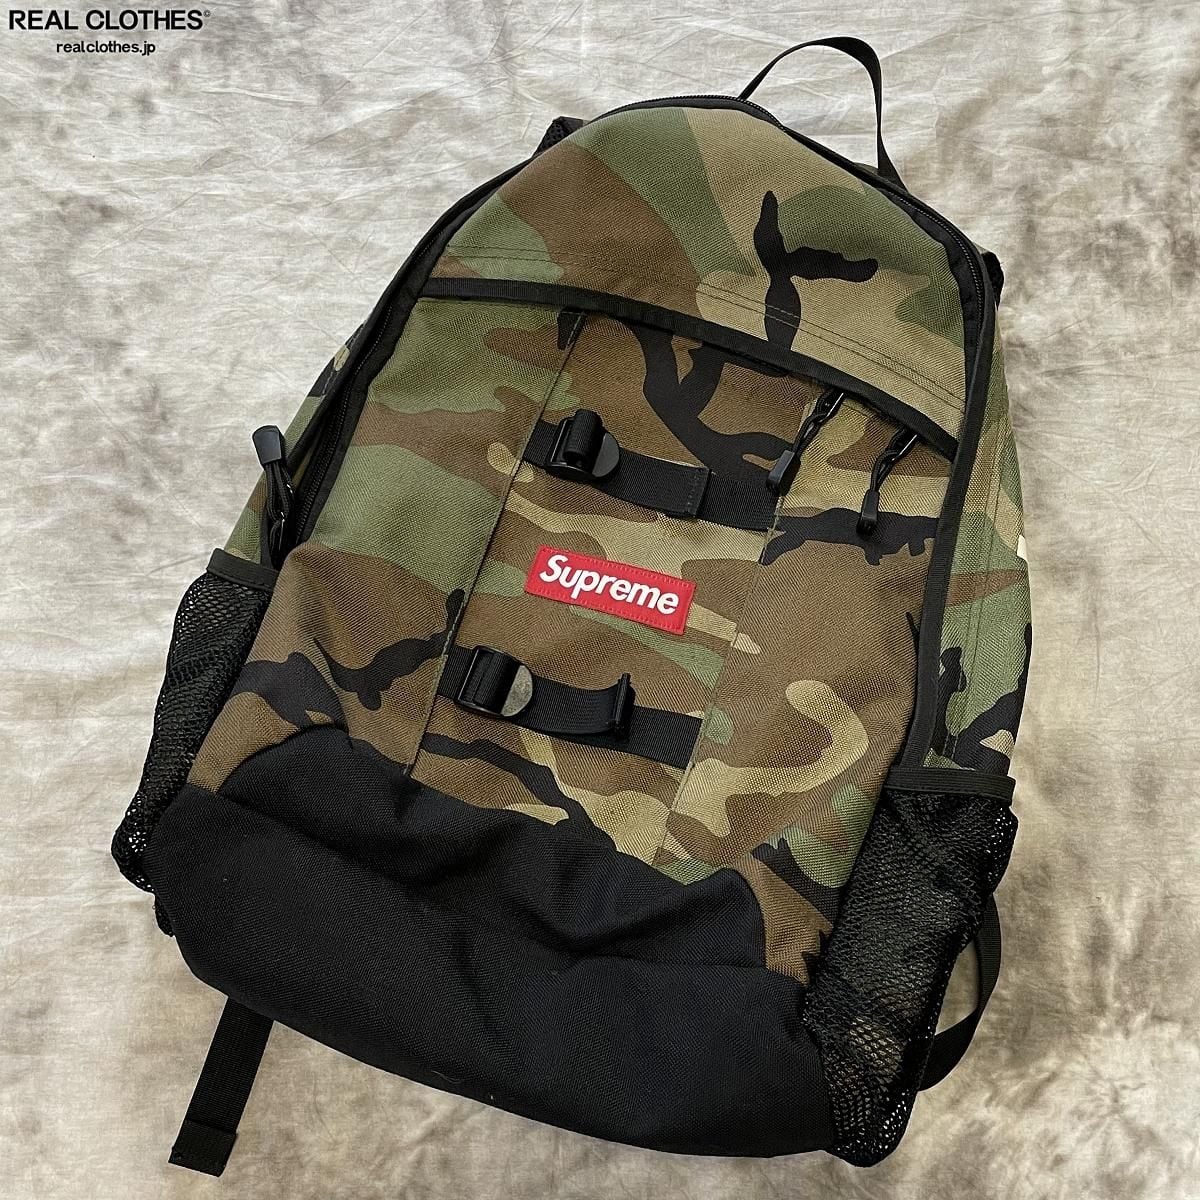 supreme 14ss backpack camo - バッグパック/リュック